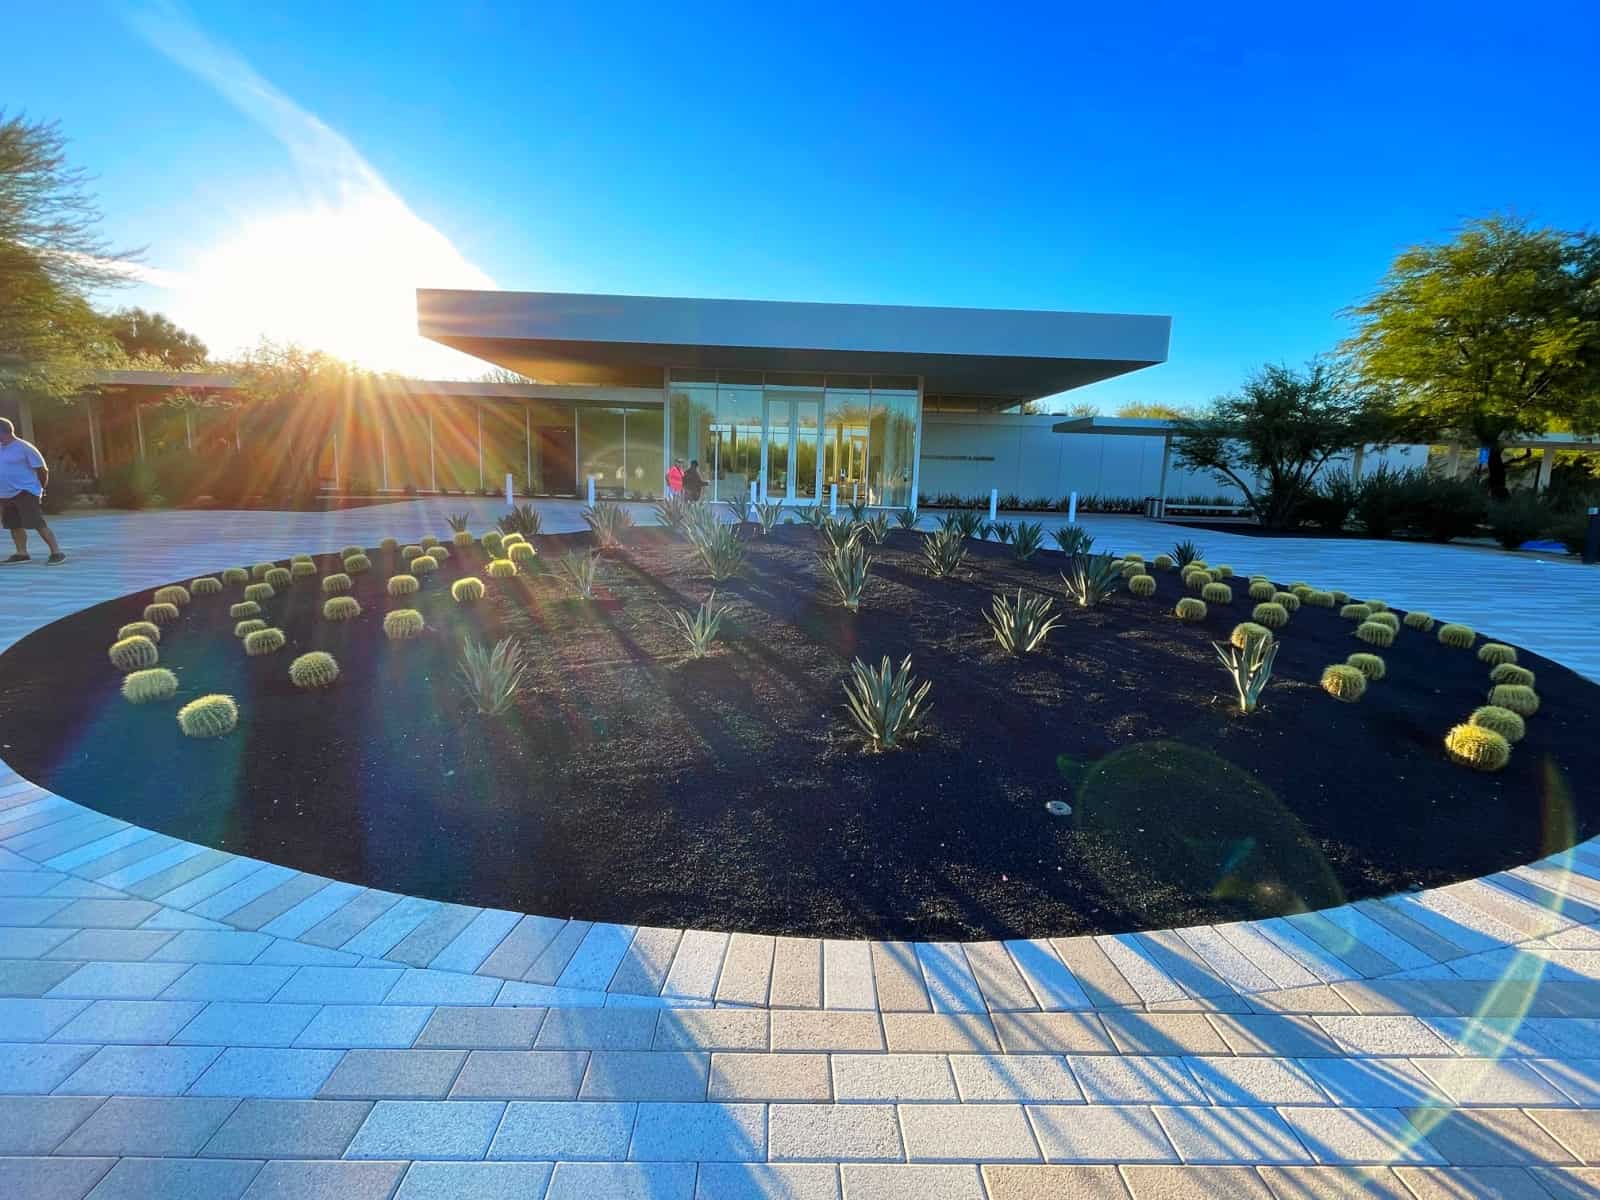 SunnyLands Center Garden in Rancho Mirage, California is a cultural oasis spanning 200 acres.the center showcases interactive exhibits highlighting the Annenberg family’s legacy in art, diplomacy.